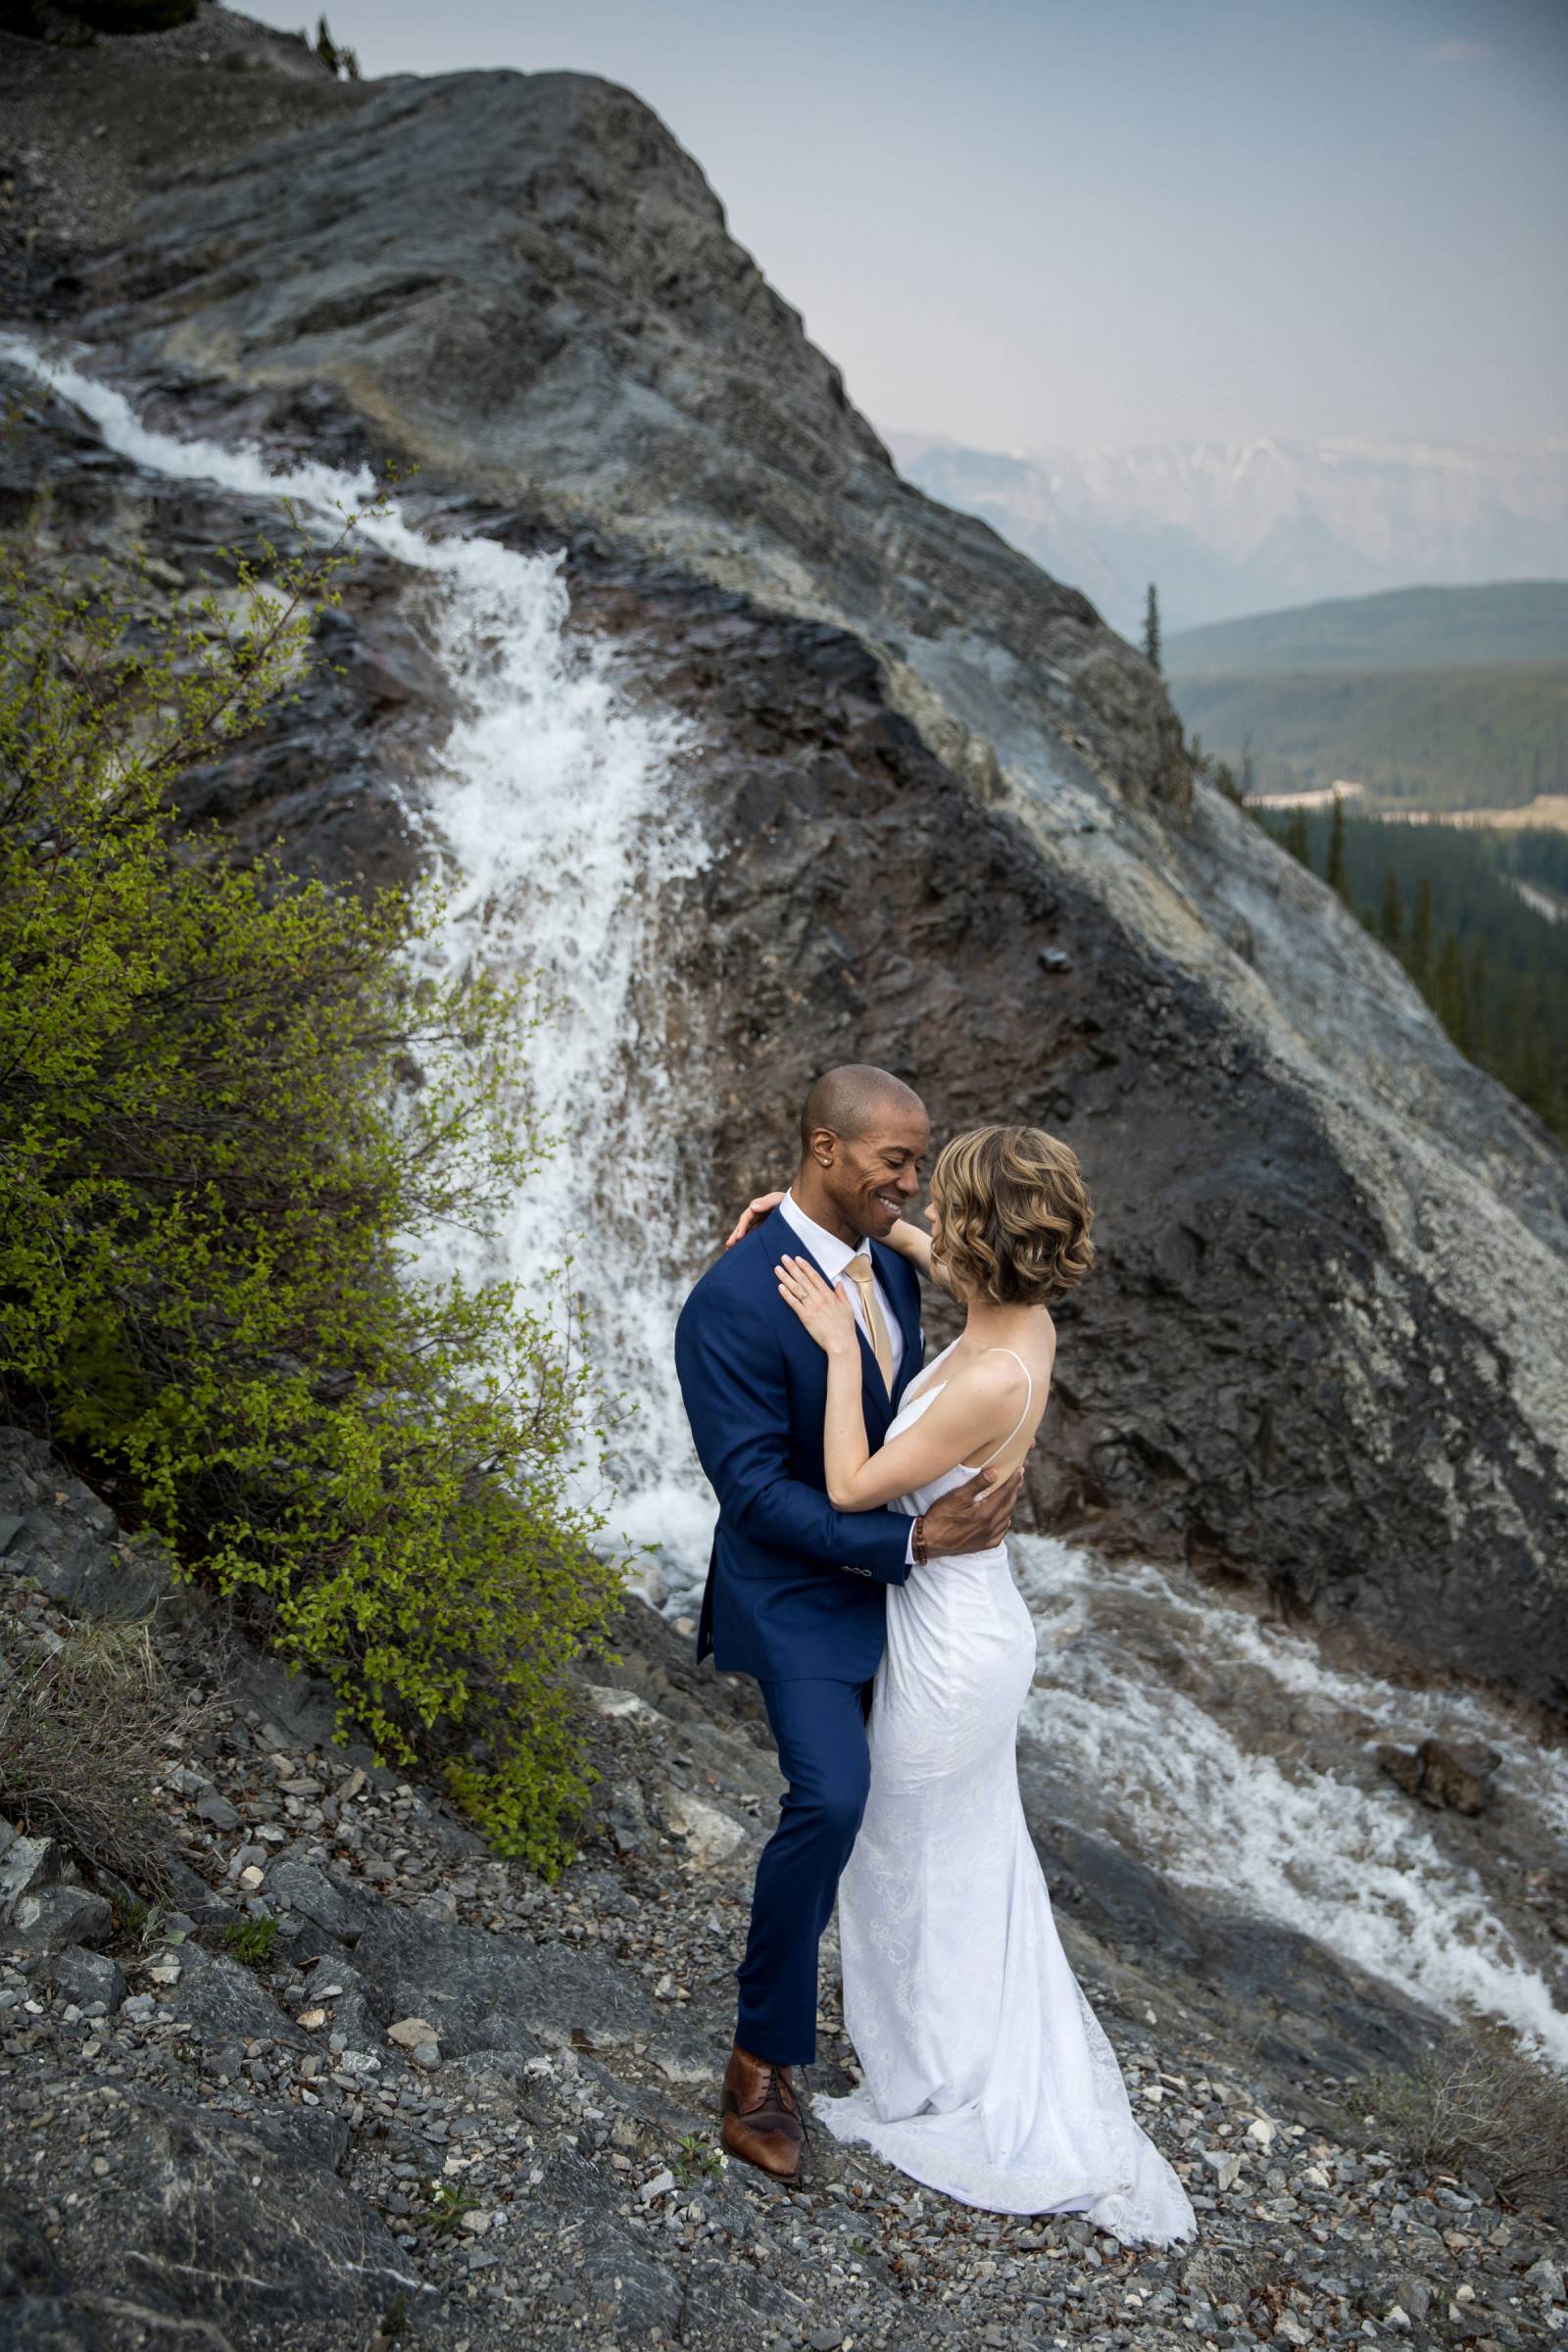 Eloping in Banff National Park, Eloping in the Canadian Rockies, Banff Elopement Photographer, Banff